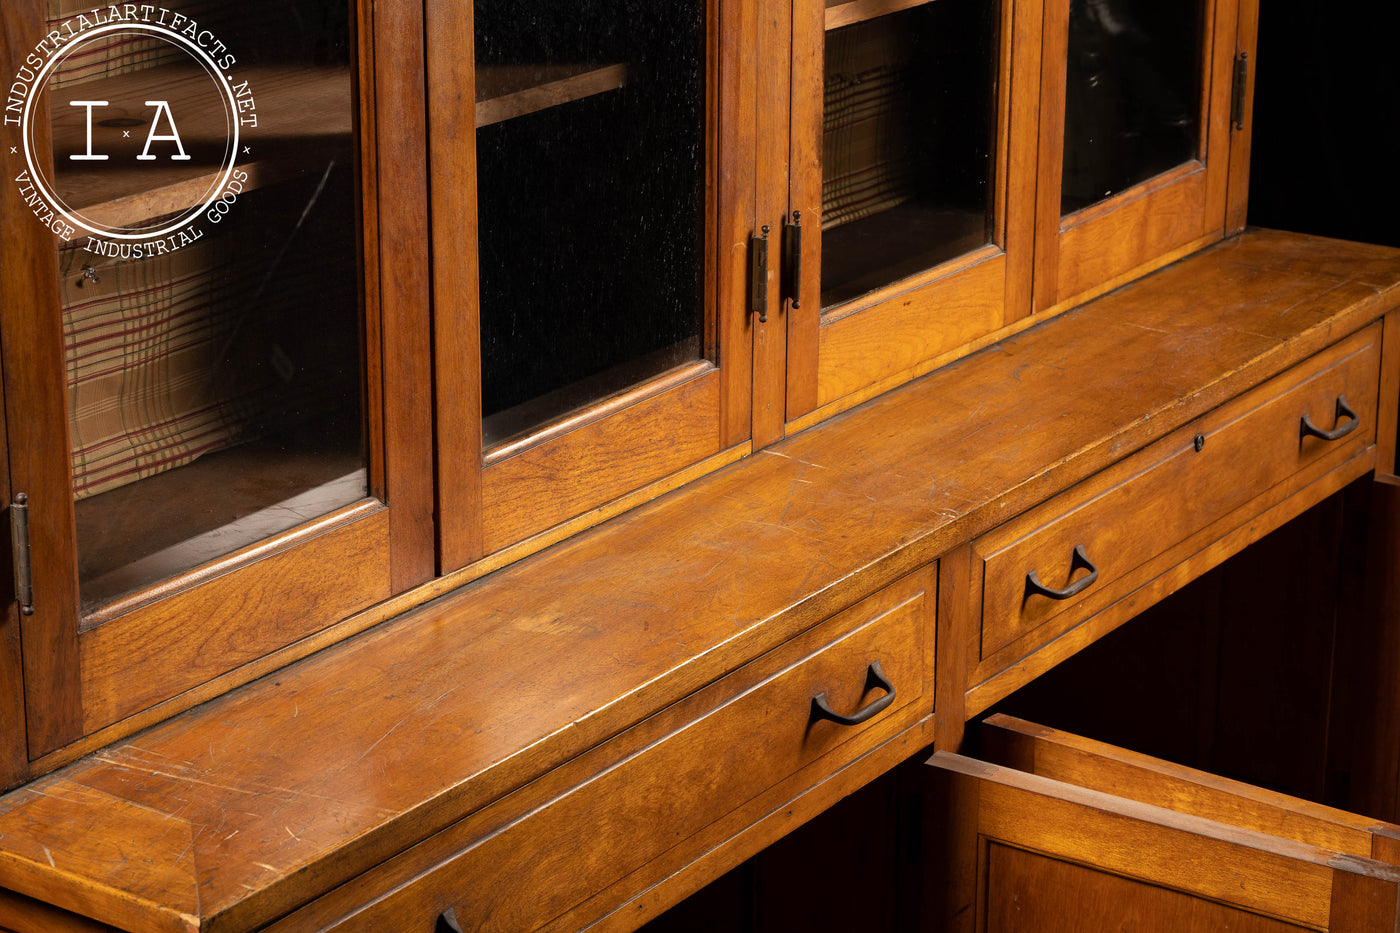 Massive Antique Wooden Hutch with Glass Doors